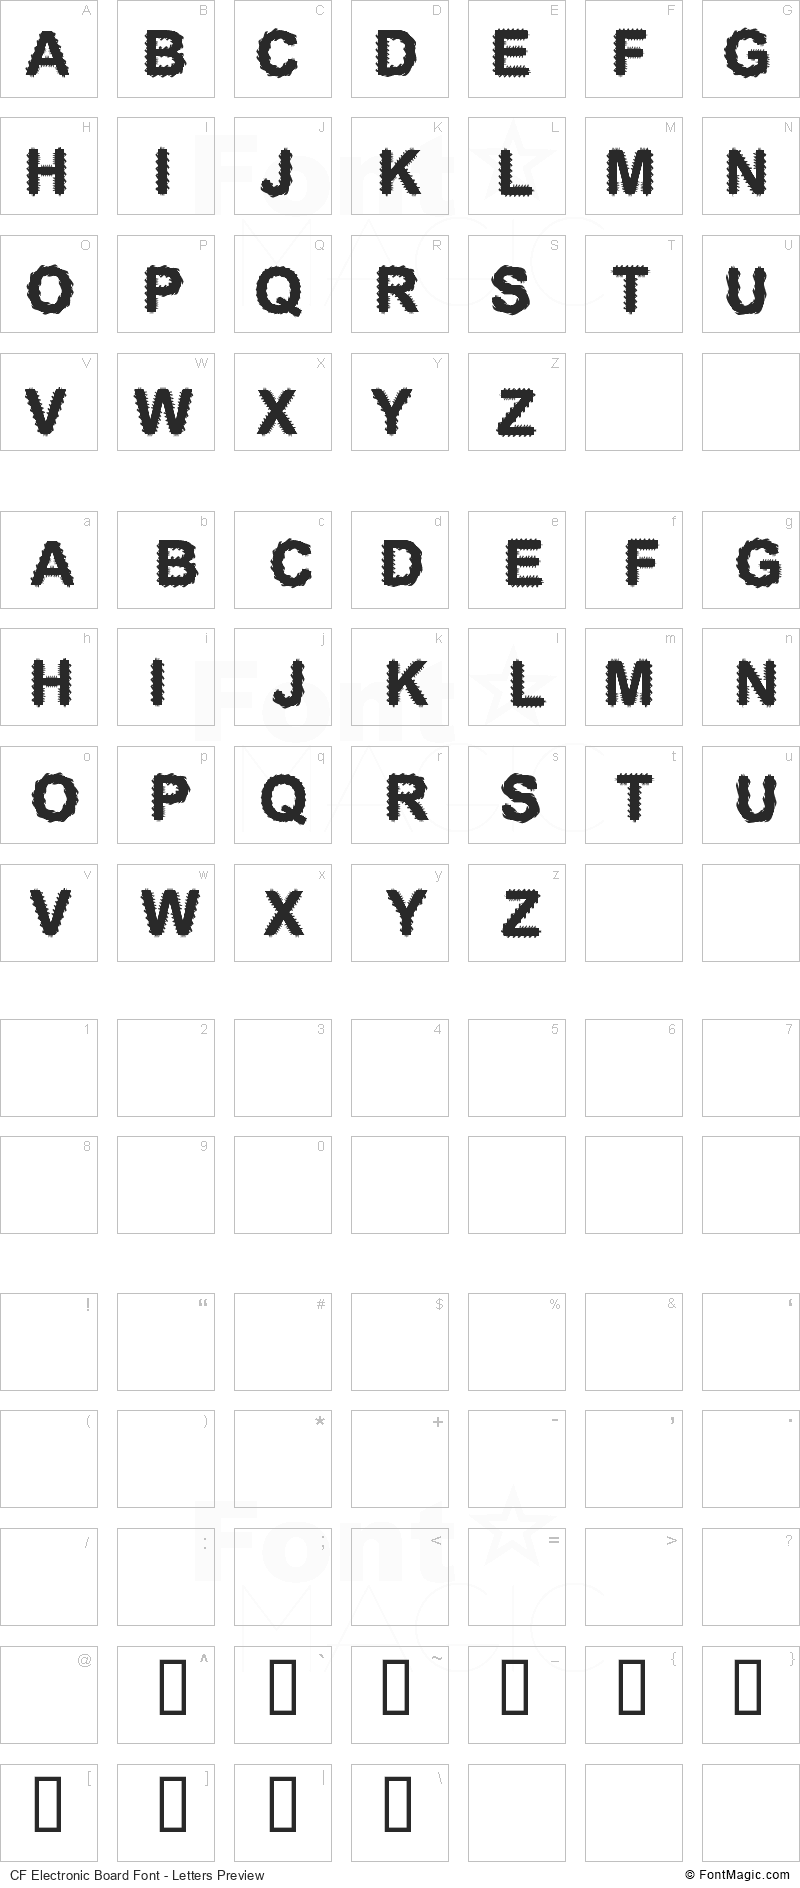 CF Electronic Board Font - All Latters Preview Chart